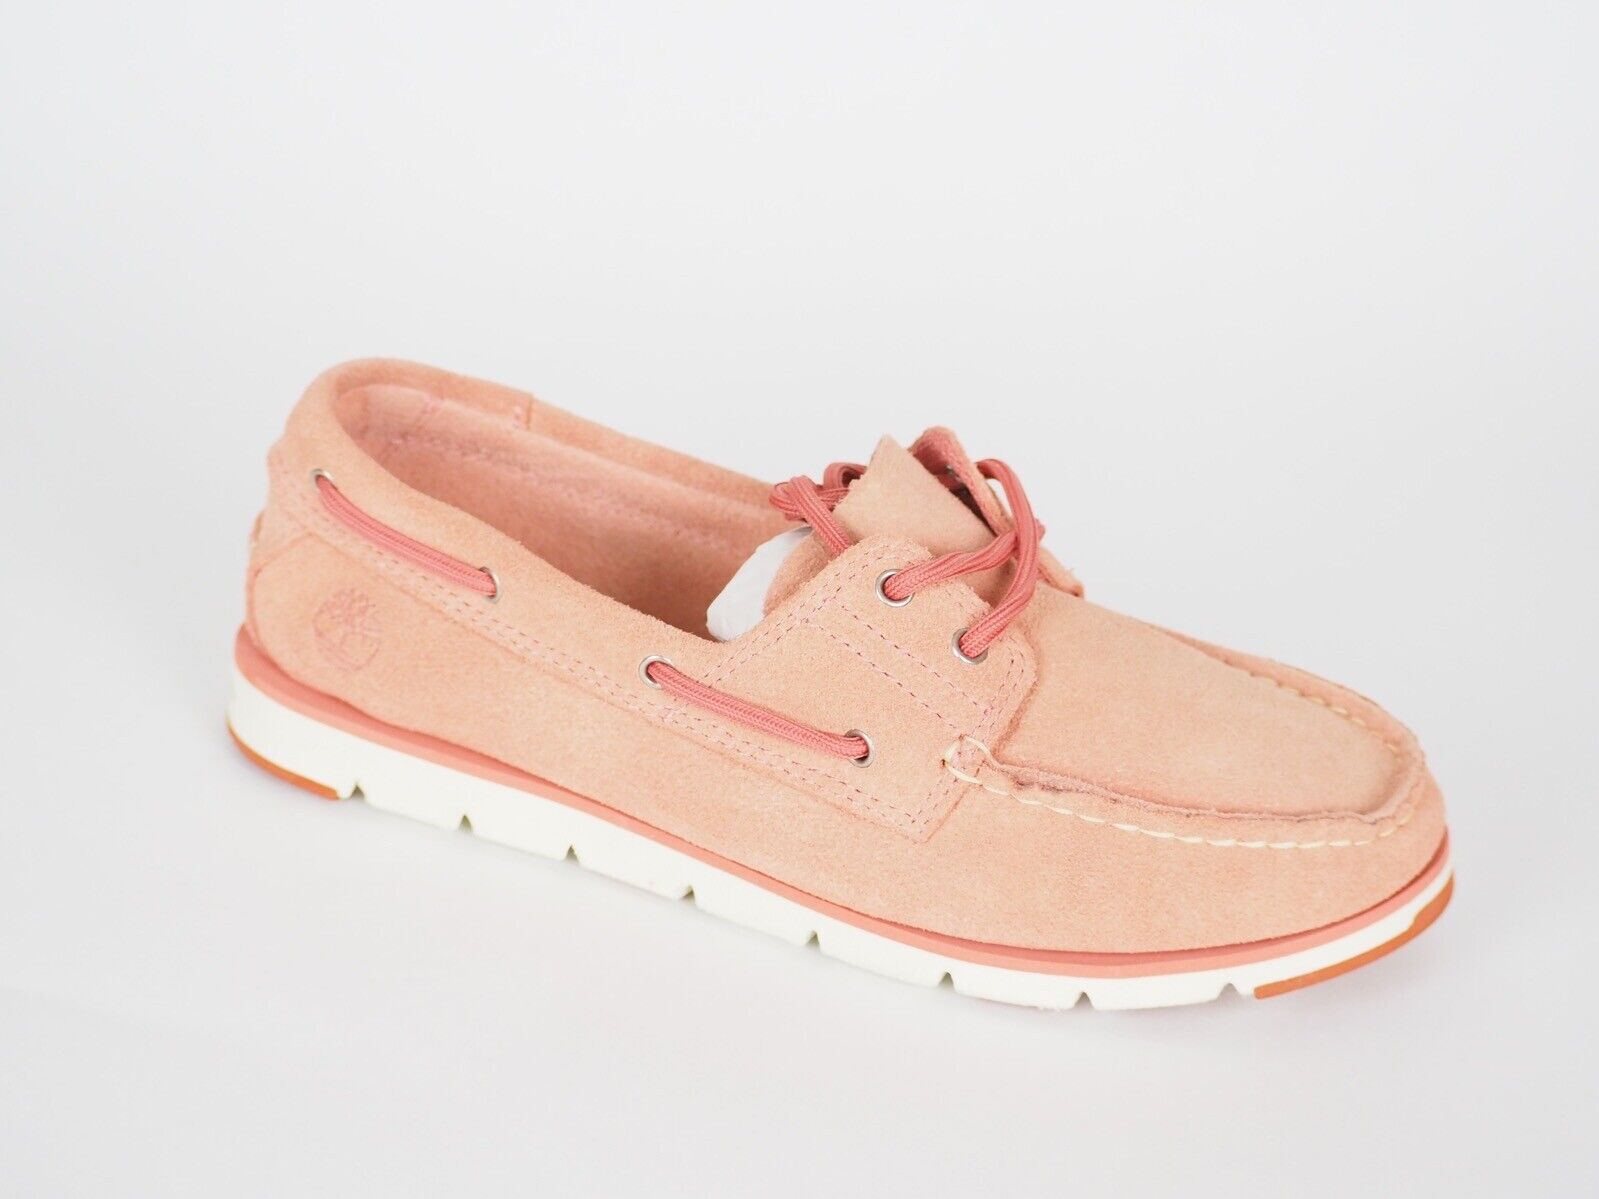 Womens Timberland Camden Falls A1MW8 Pink Suede Boat Deck Shoes - London Top Style